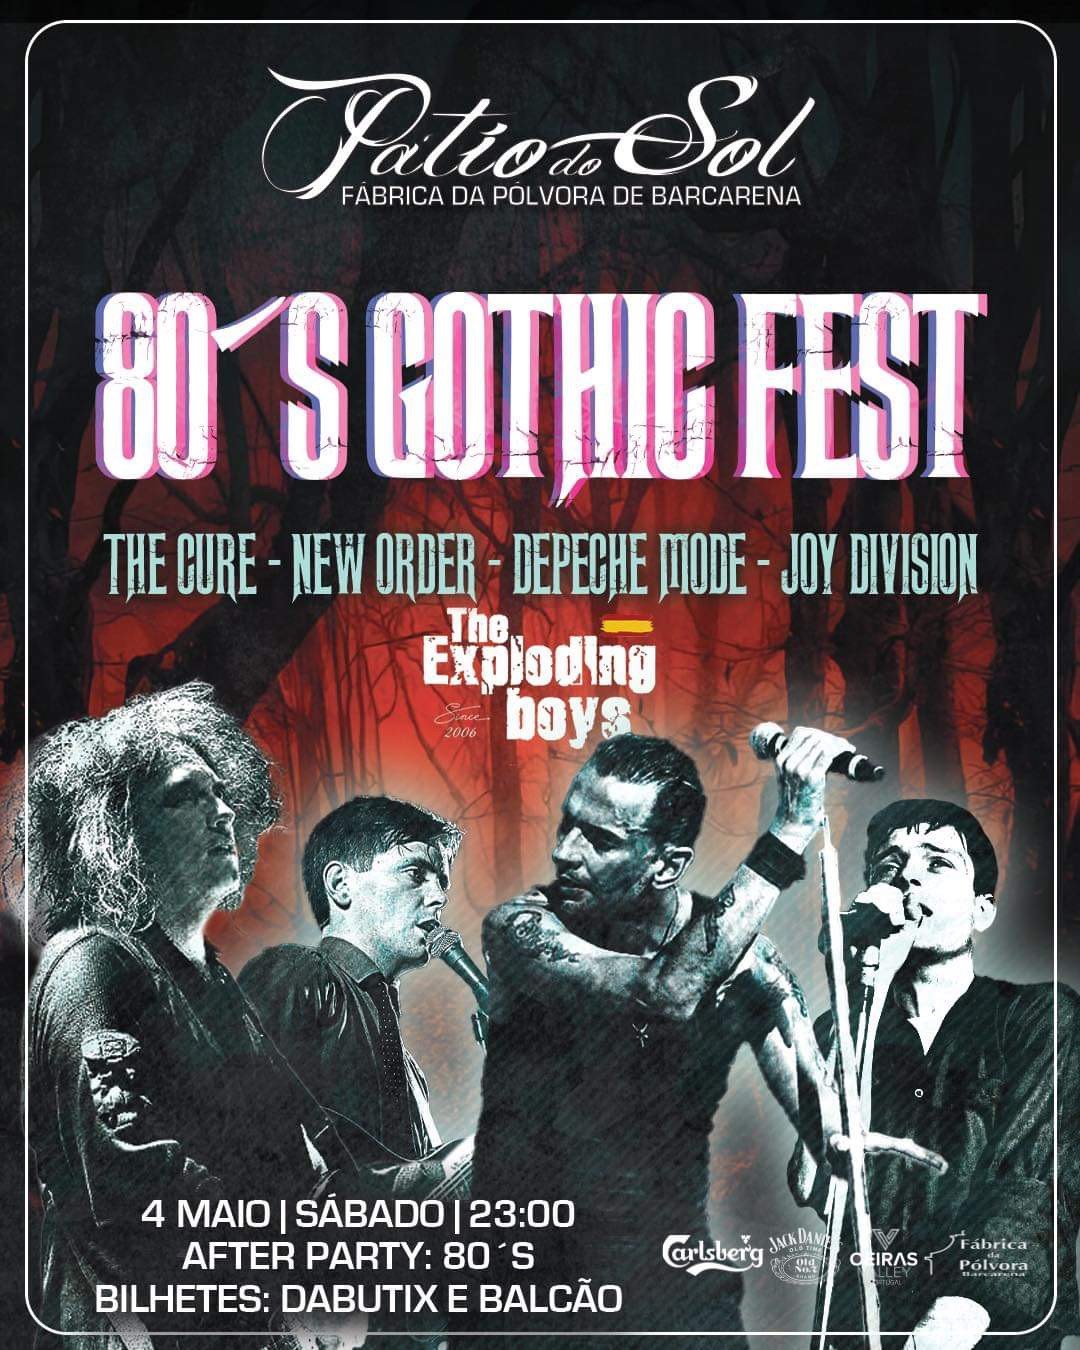 80’s GOTHIC FEST II EDITION: THE CURE, DEPECHE MODE, NEW ORDER & JOY DIVISION TRIBUTES  on May 04, 23:00@Patio do Sol (Lisboa) - Buy tickets and Get information on DABUTIX dabutix.com